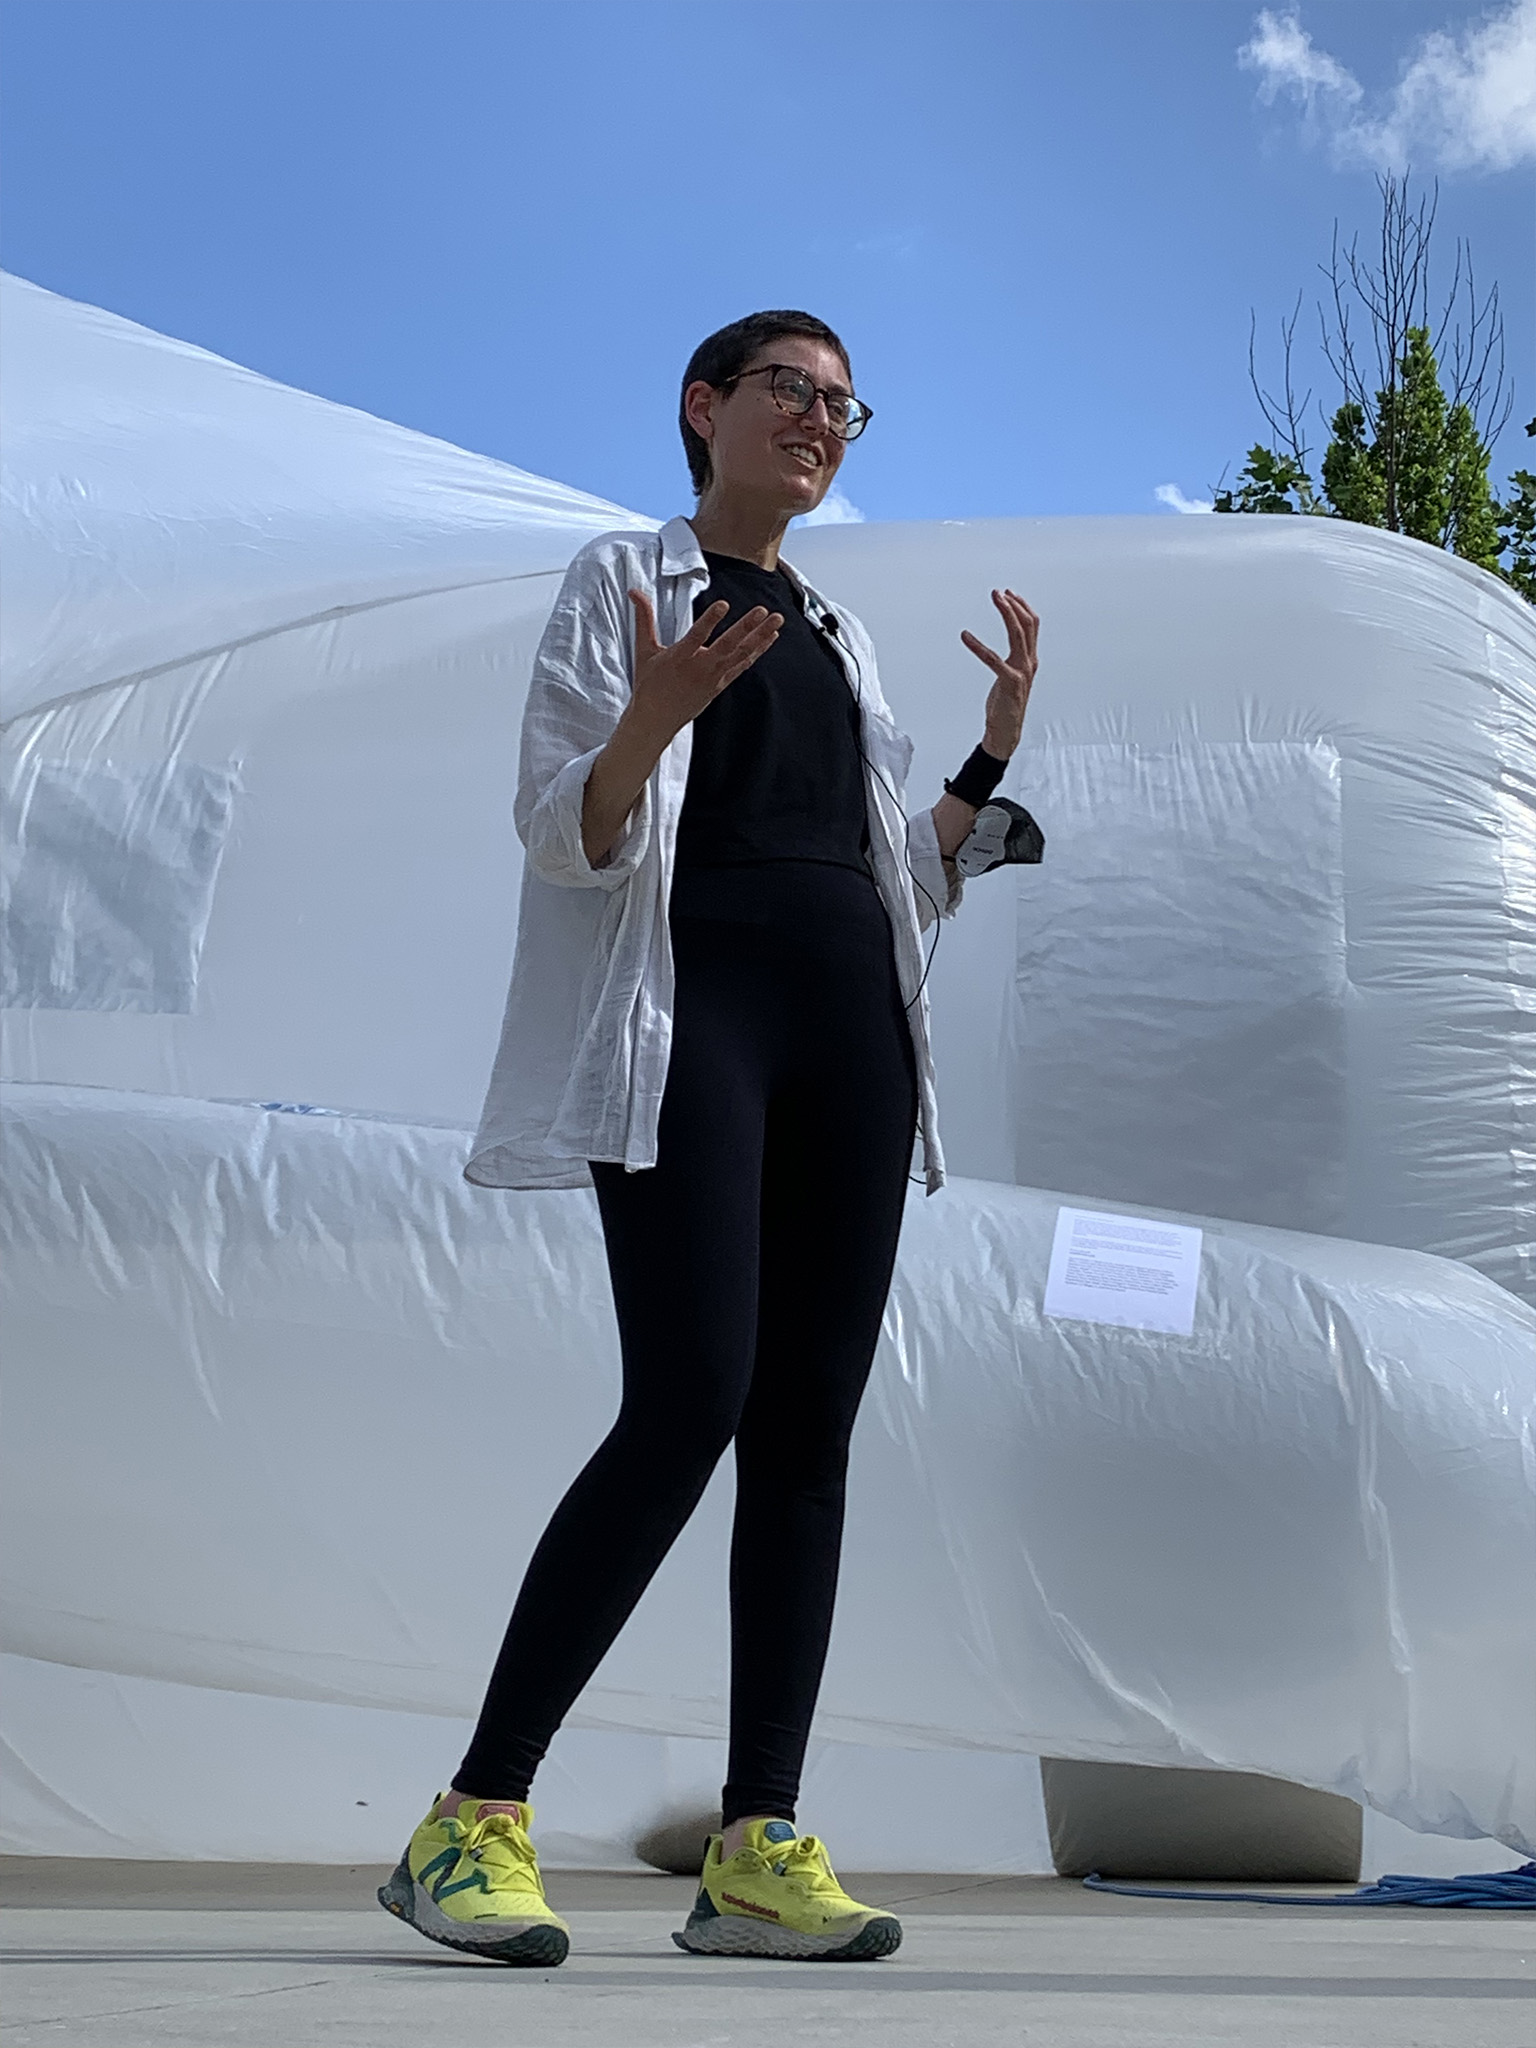 A woman wearing black with a white jacket stands in front of a white inflated structure